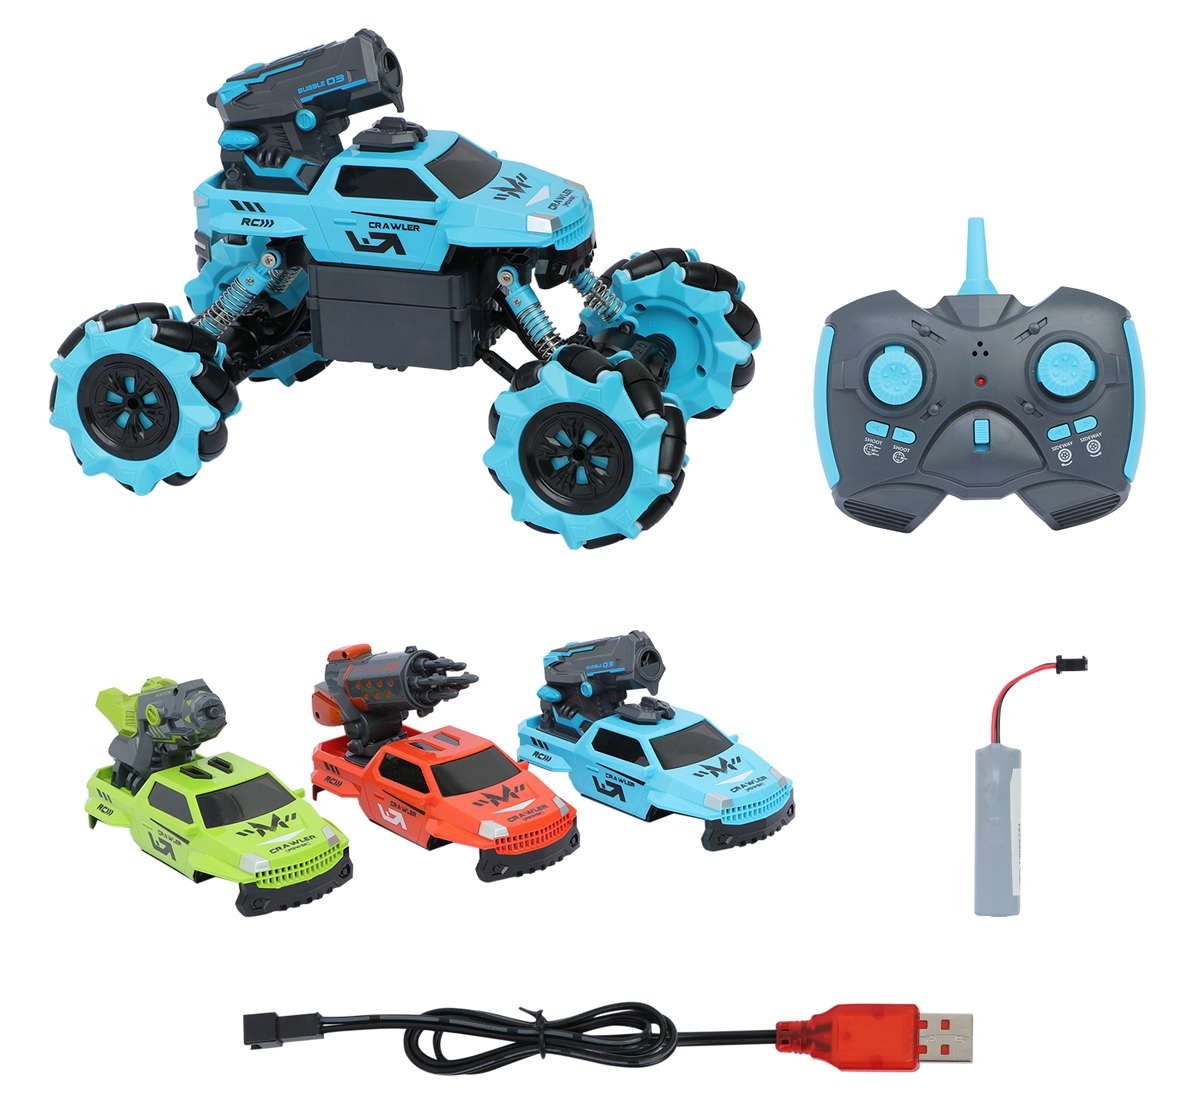 Ralleyz | Ralleyz 1:10 Scale 3 In 1 Crawling Off Roader Remote Control Car with 2.4GHZ for Kids 6Y+, Multicolour